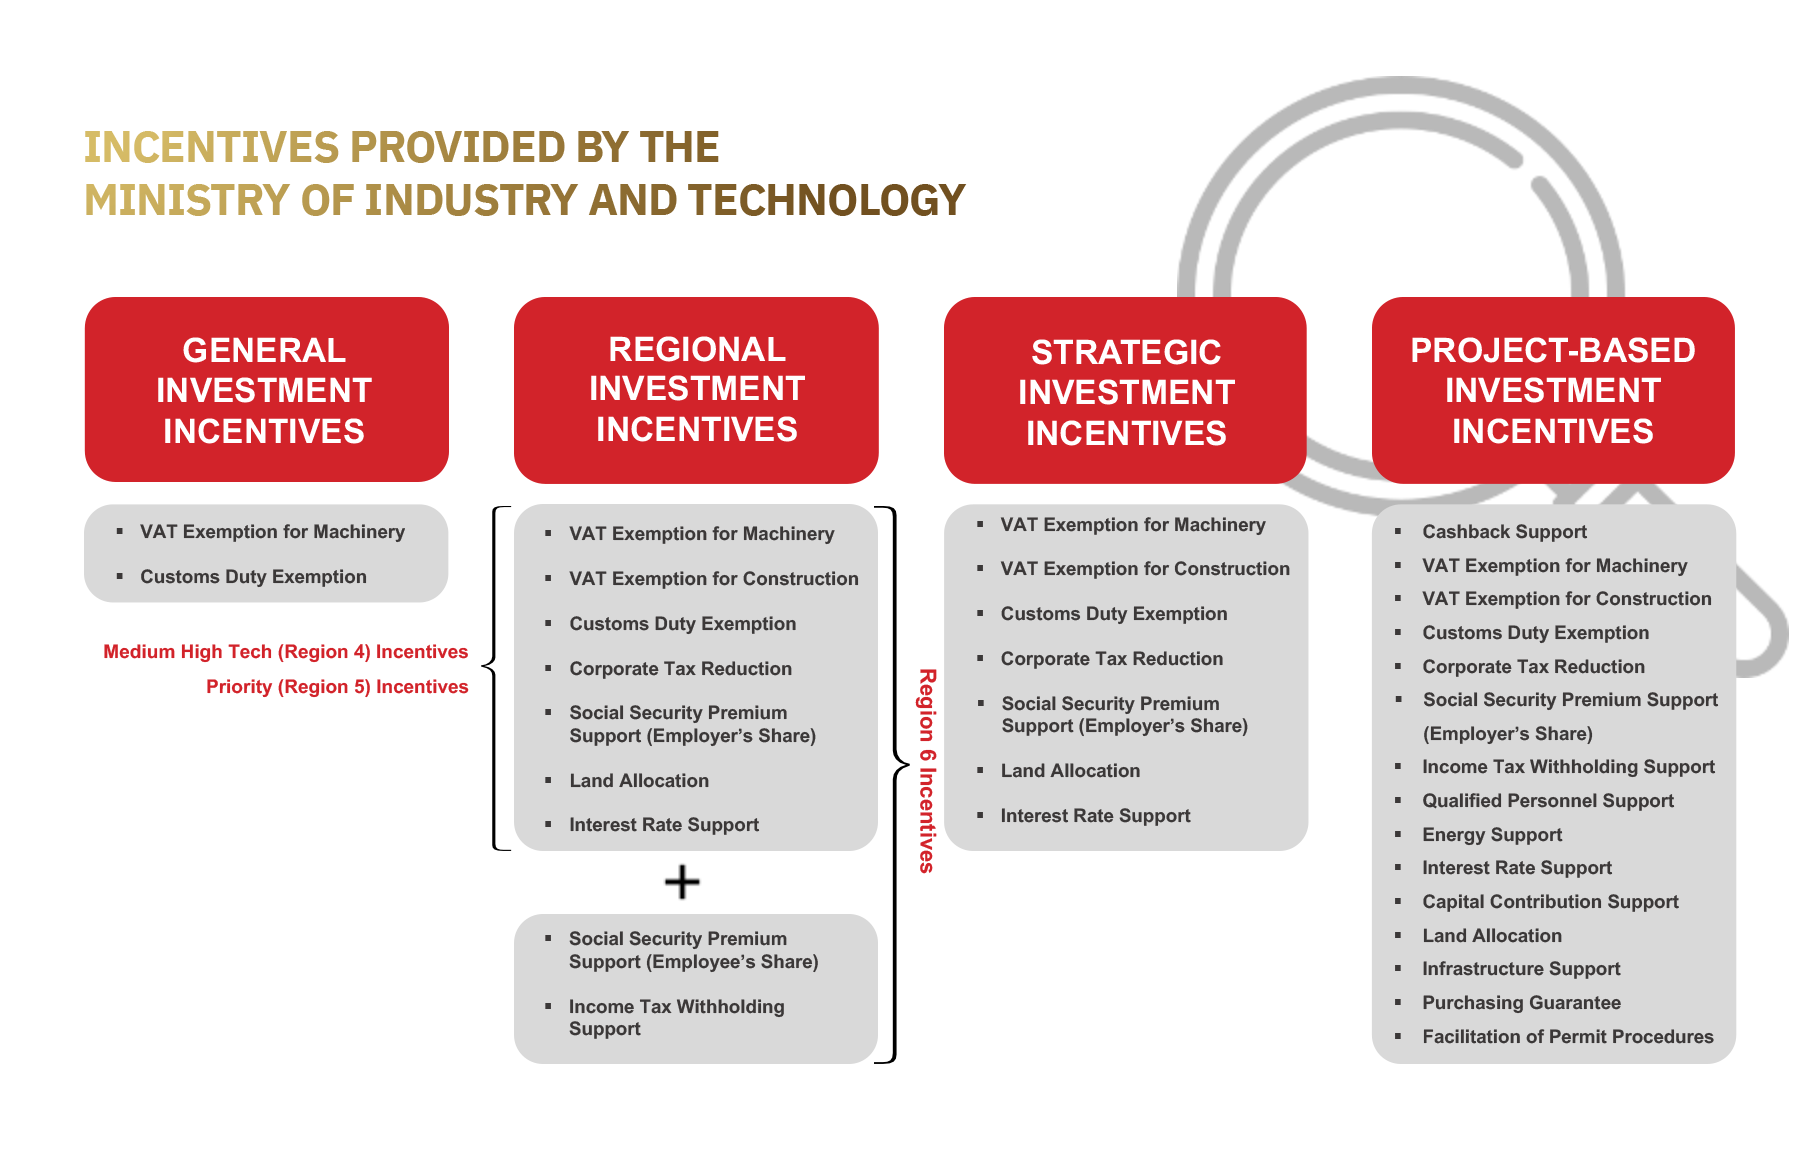 incentives_provided_by_the_ministry_of_industry_and_technology-2023-en.png